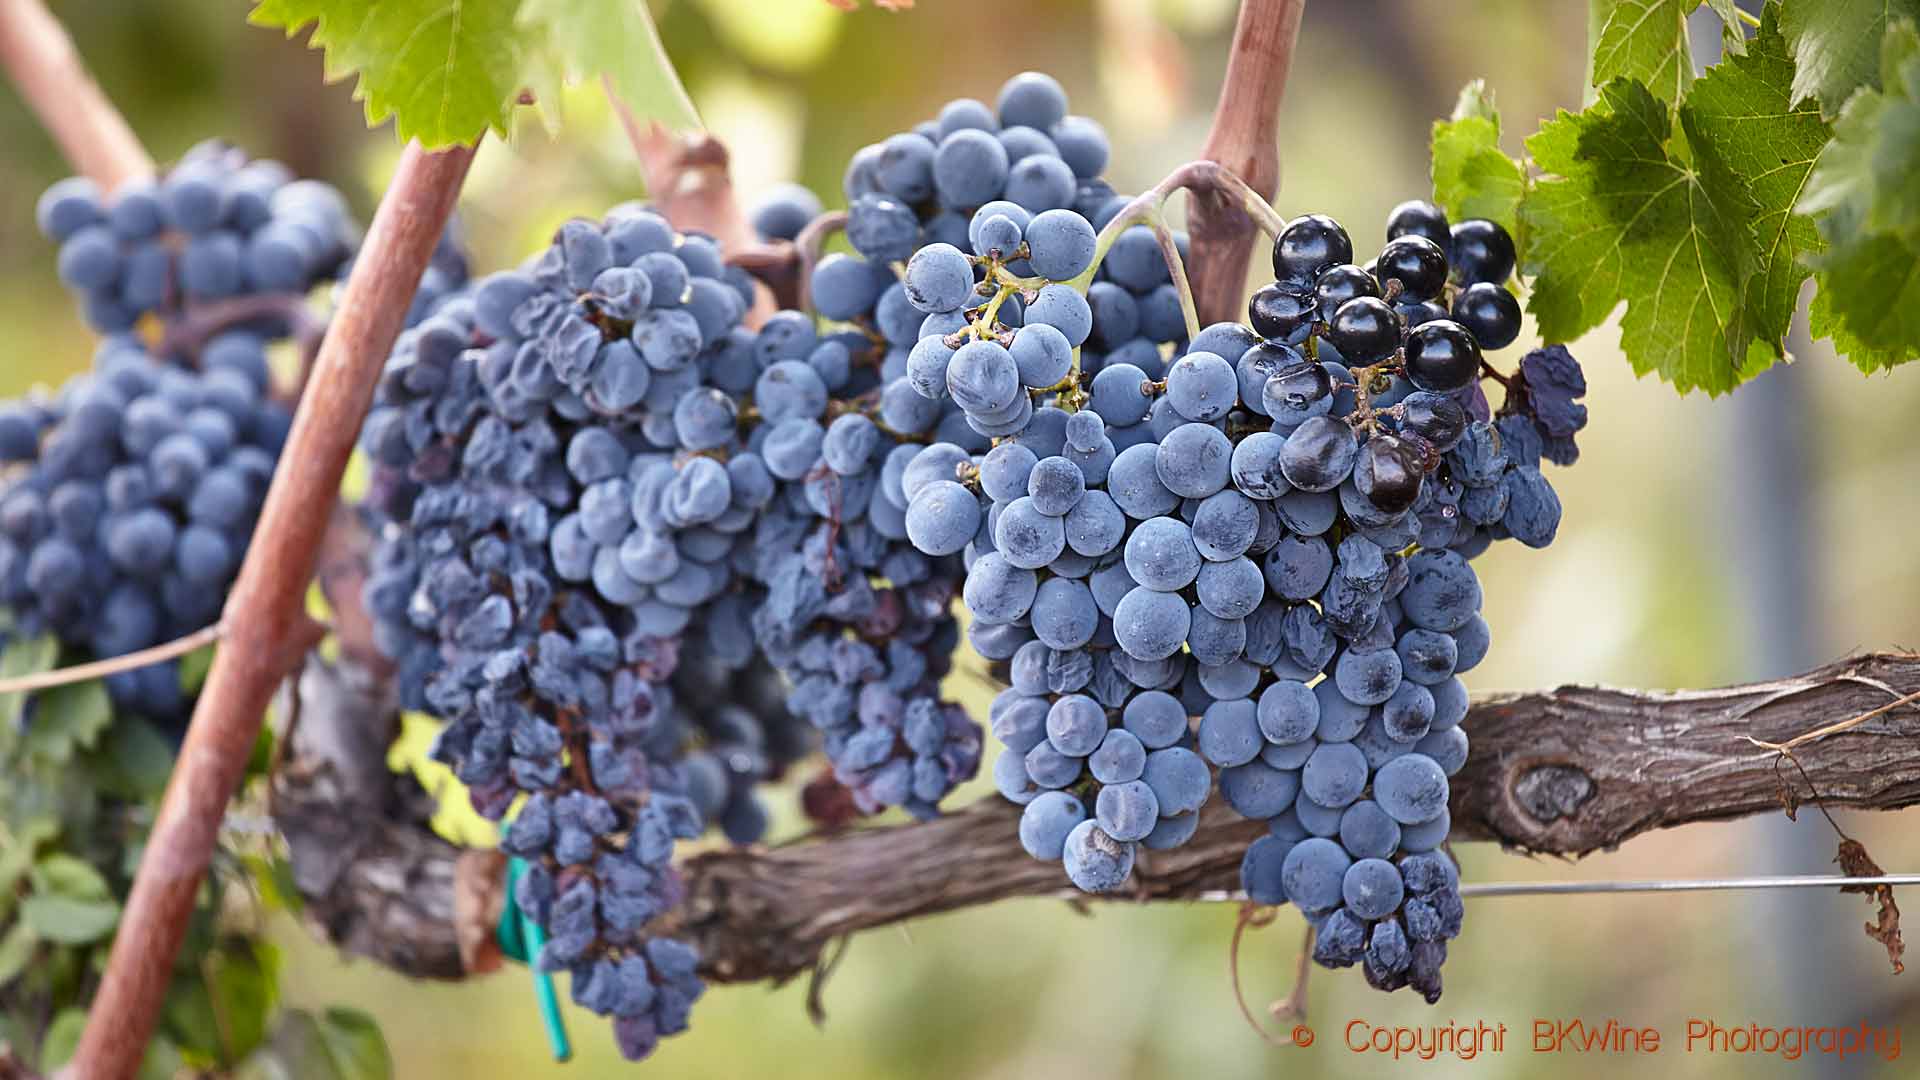 Ripe nerello mascalese grapes ready for harvest in a vineyard on Etna, Sicily